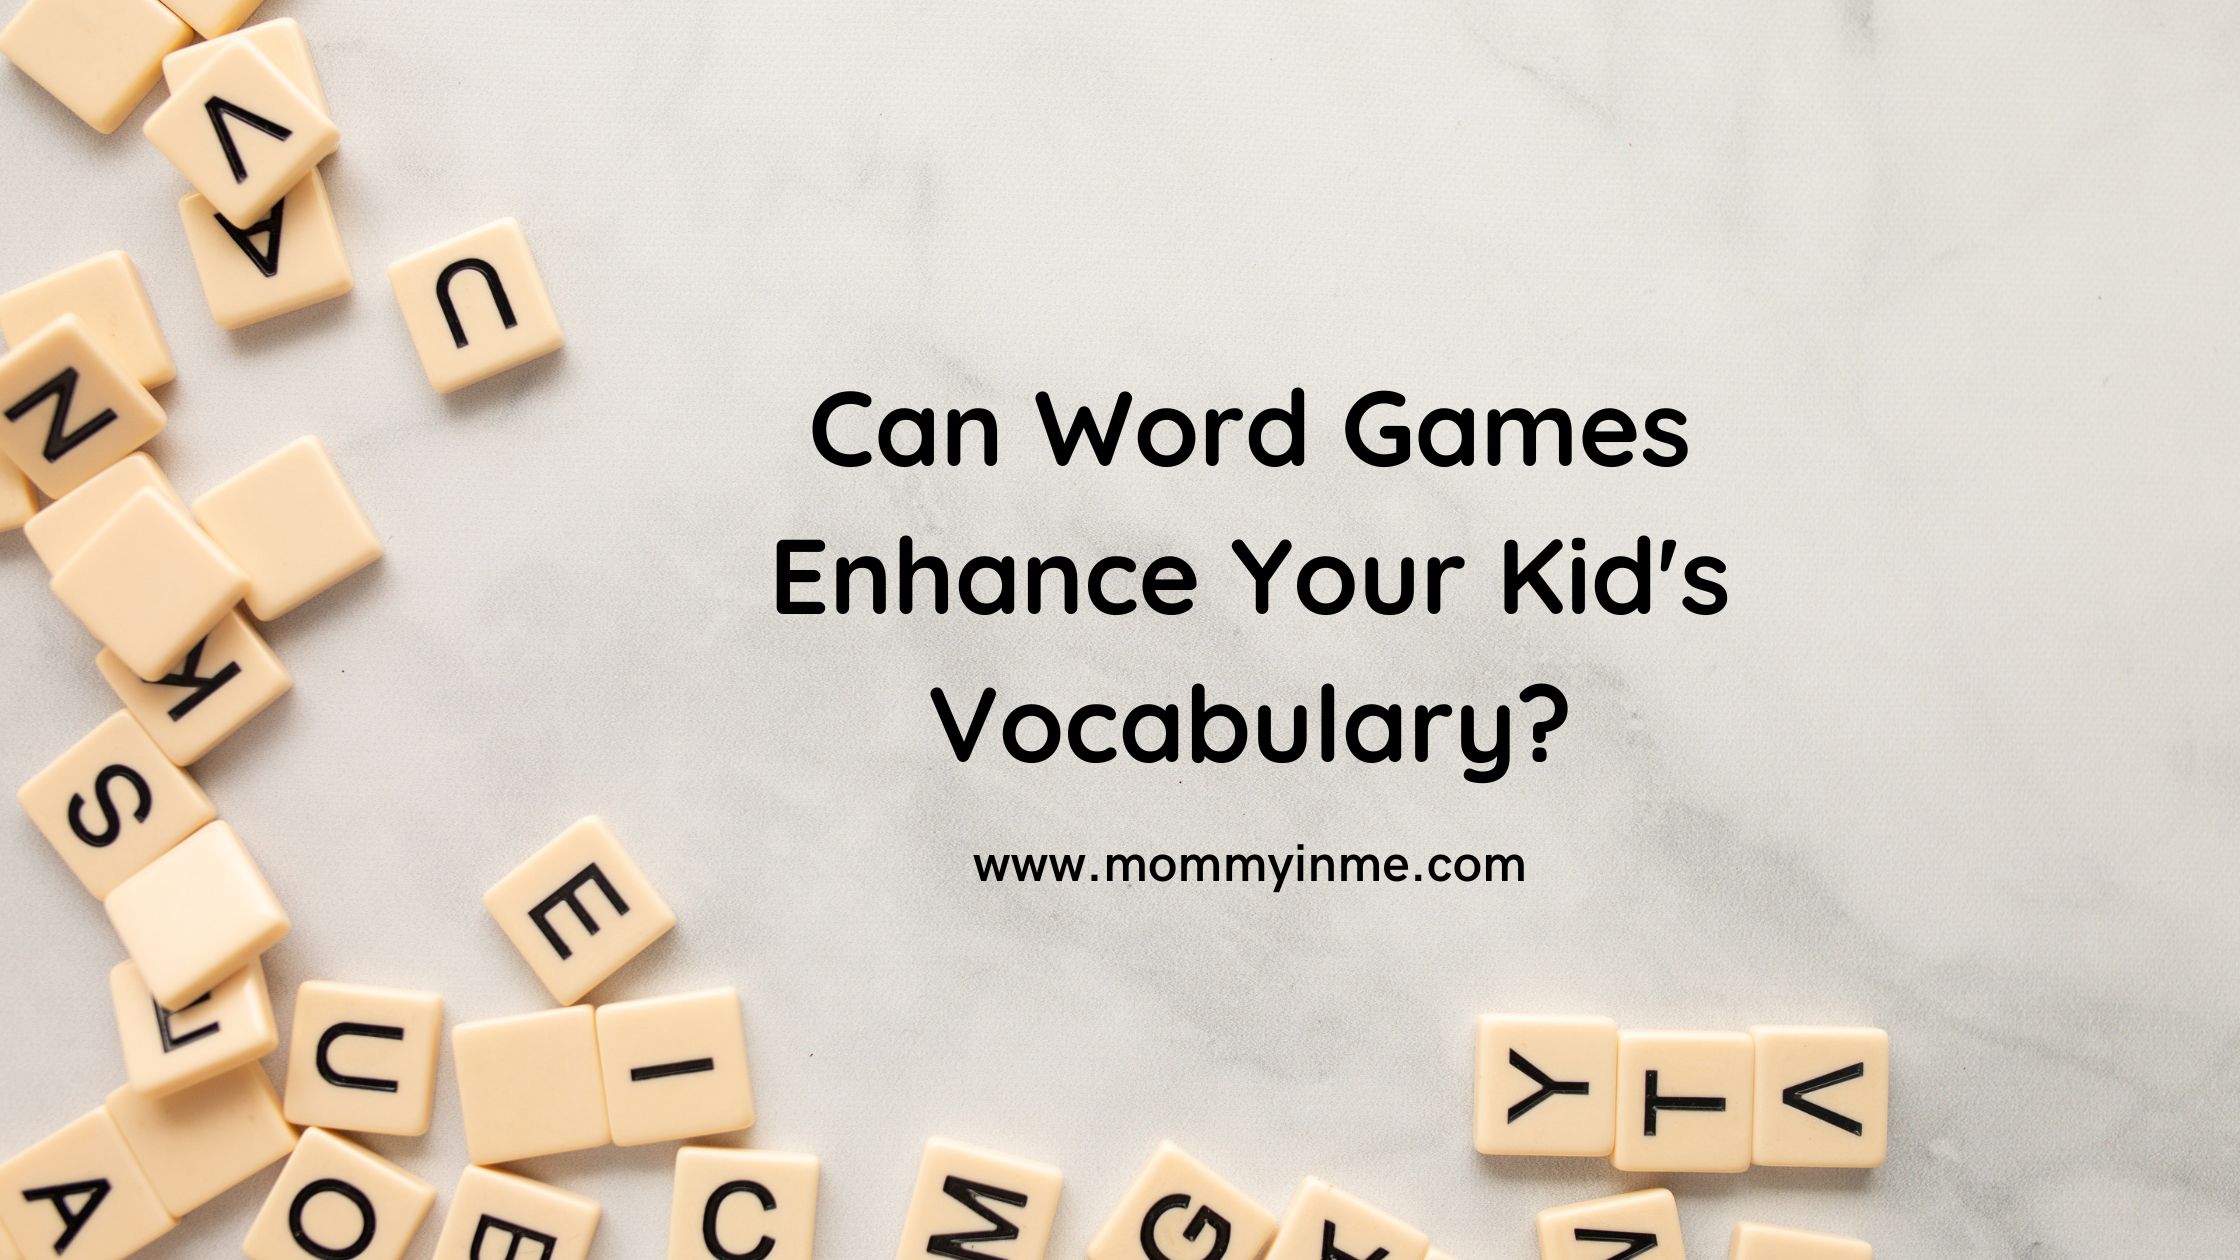 Can Word Games Enhance Your Kid